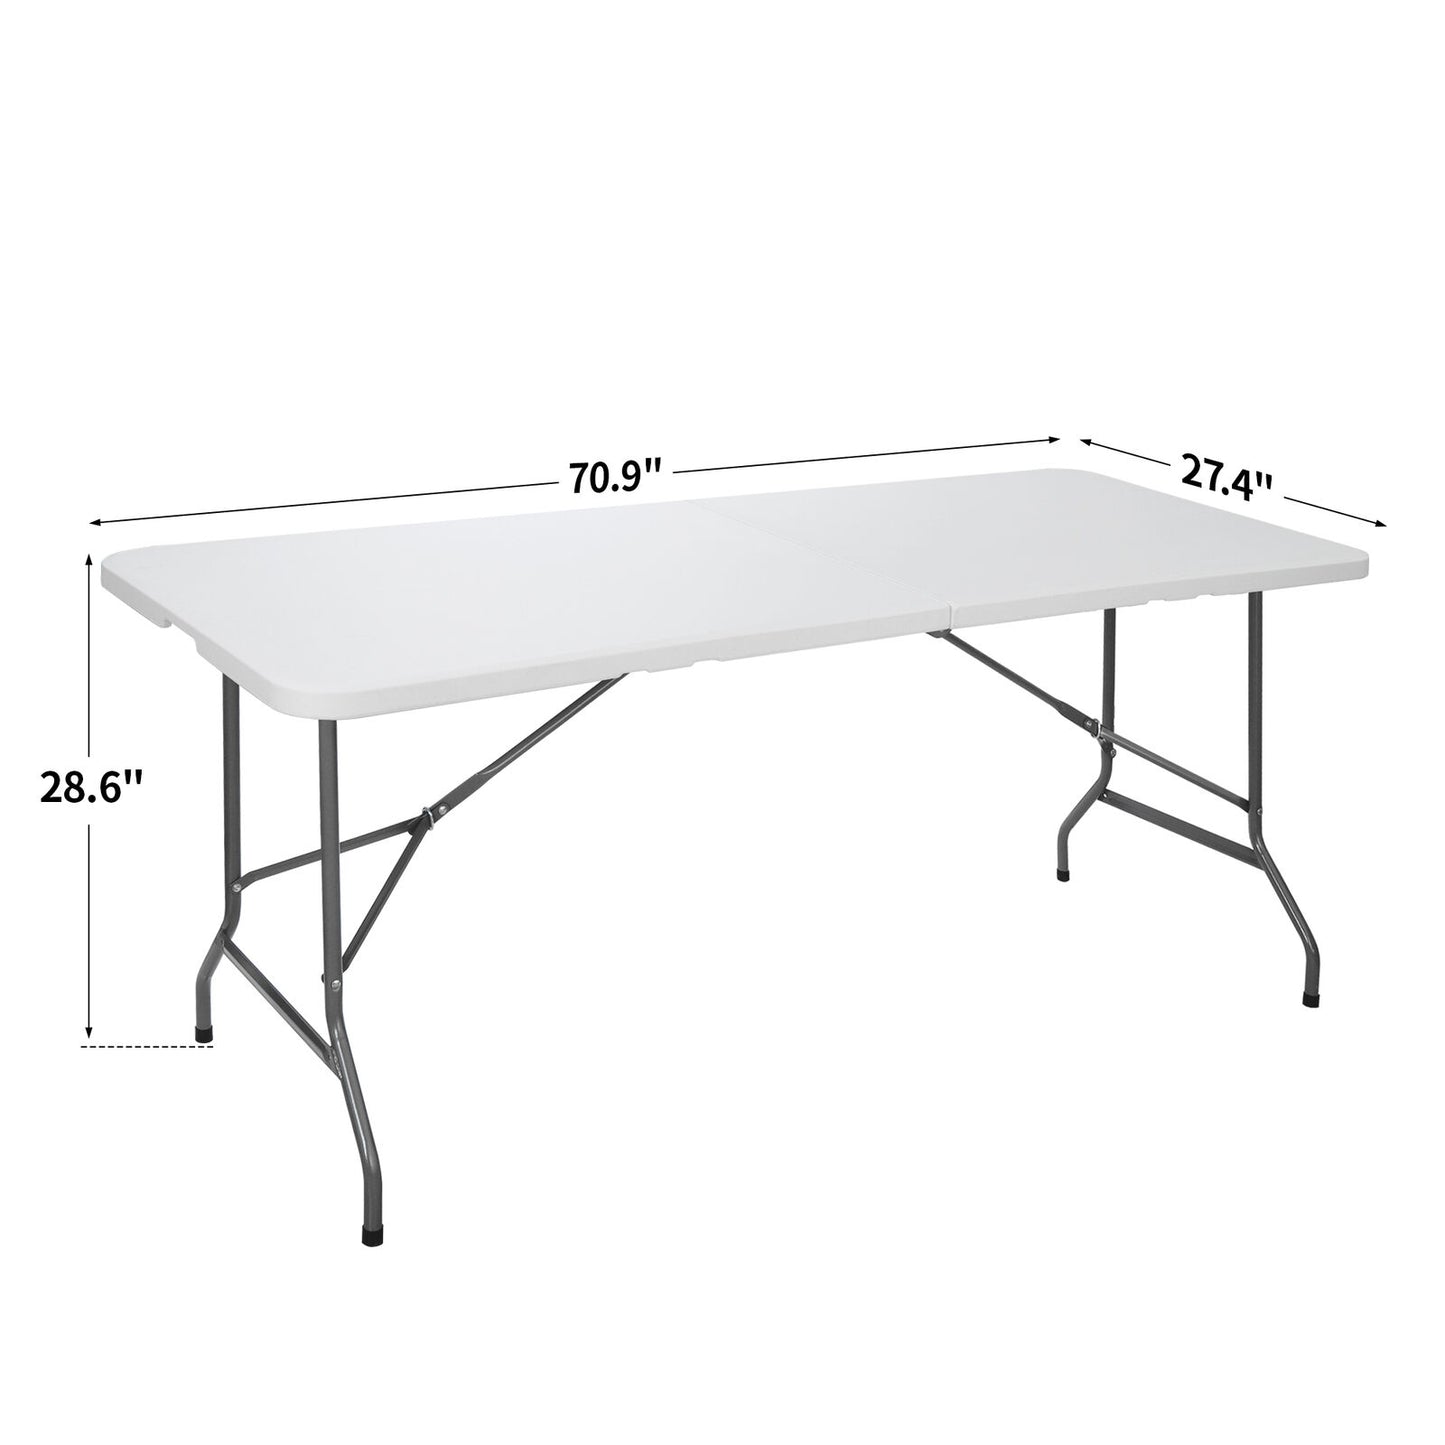 6ft Foldable Table Portable Indoor Picnic Party Camping Tables Easy to Carry